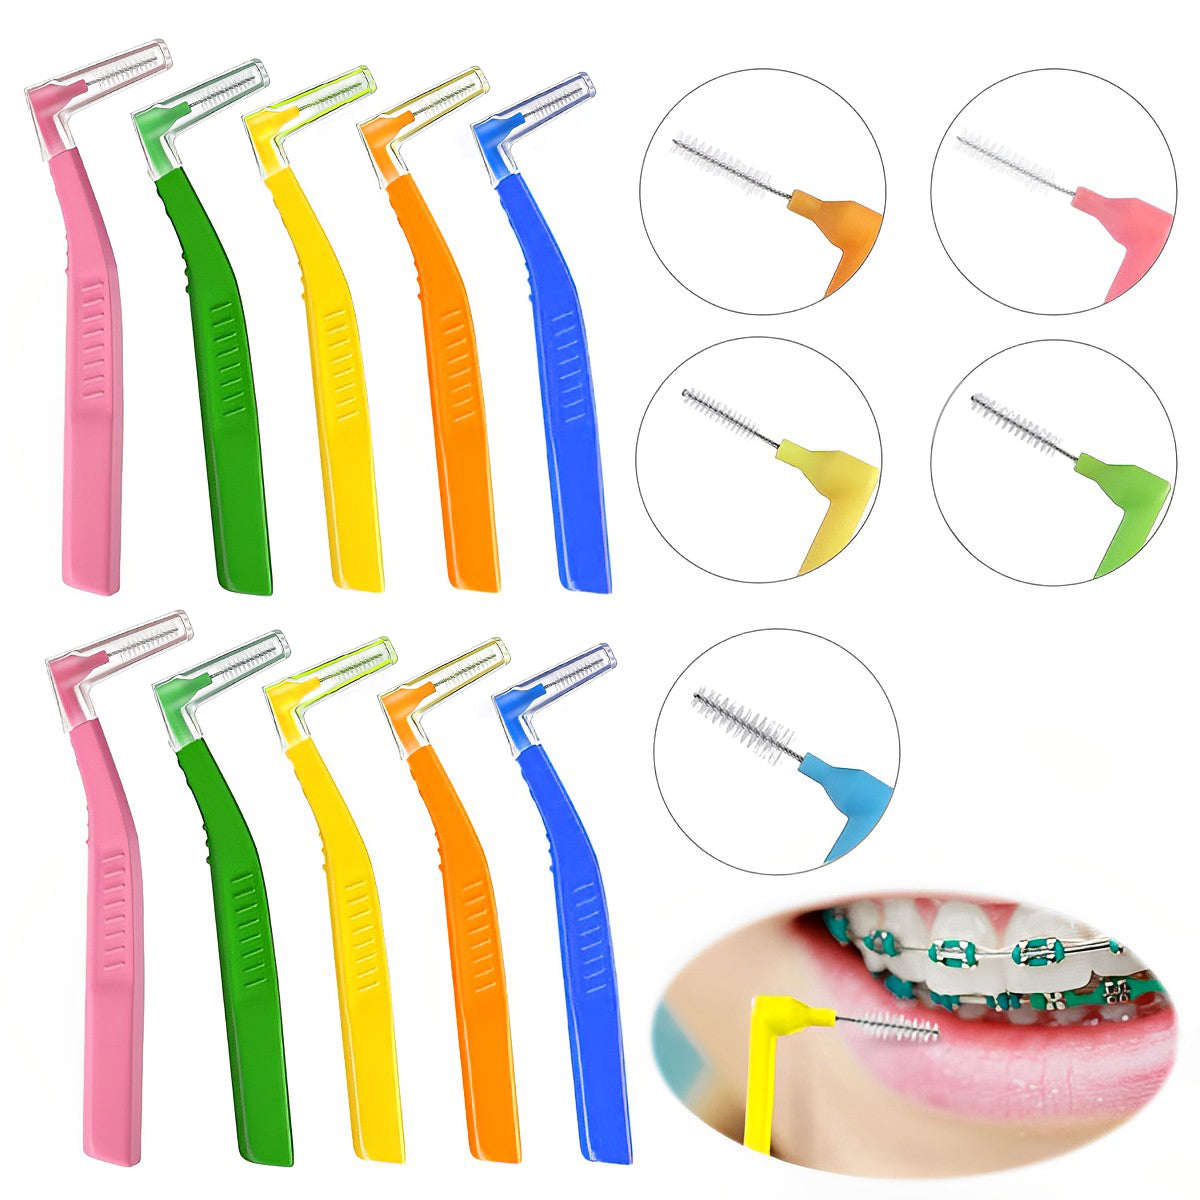 HANNEA 10pcs Interdental Brushes, L-shaped Interdental Brush Angle, Angled Dental Brush for Teeth Oral Dental Care Brush Cleaning Tool